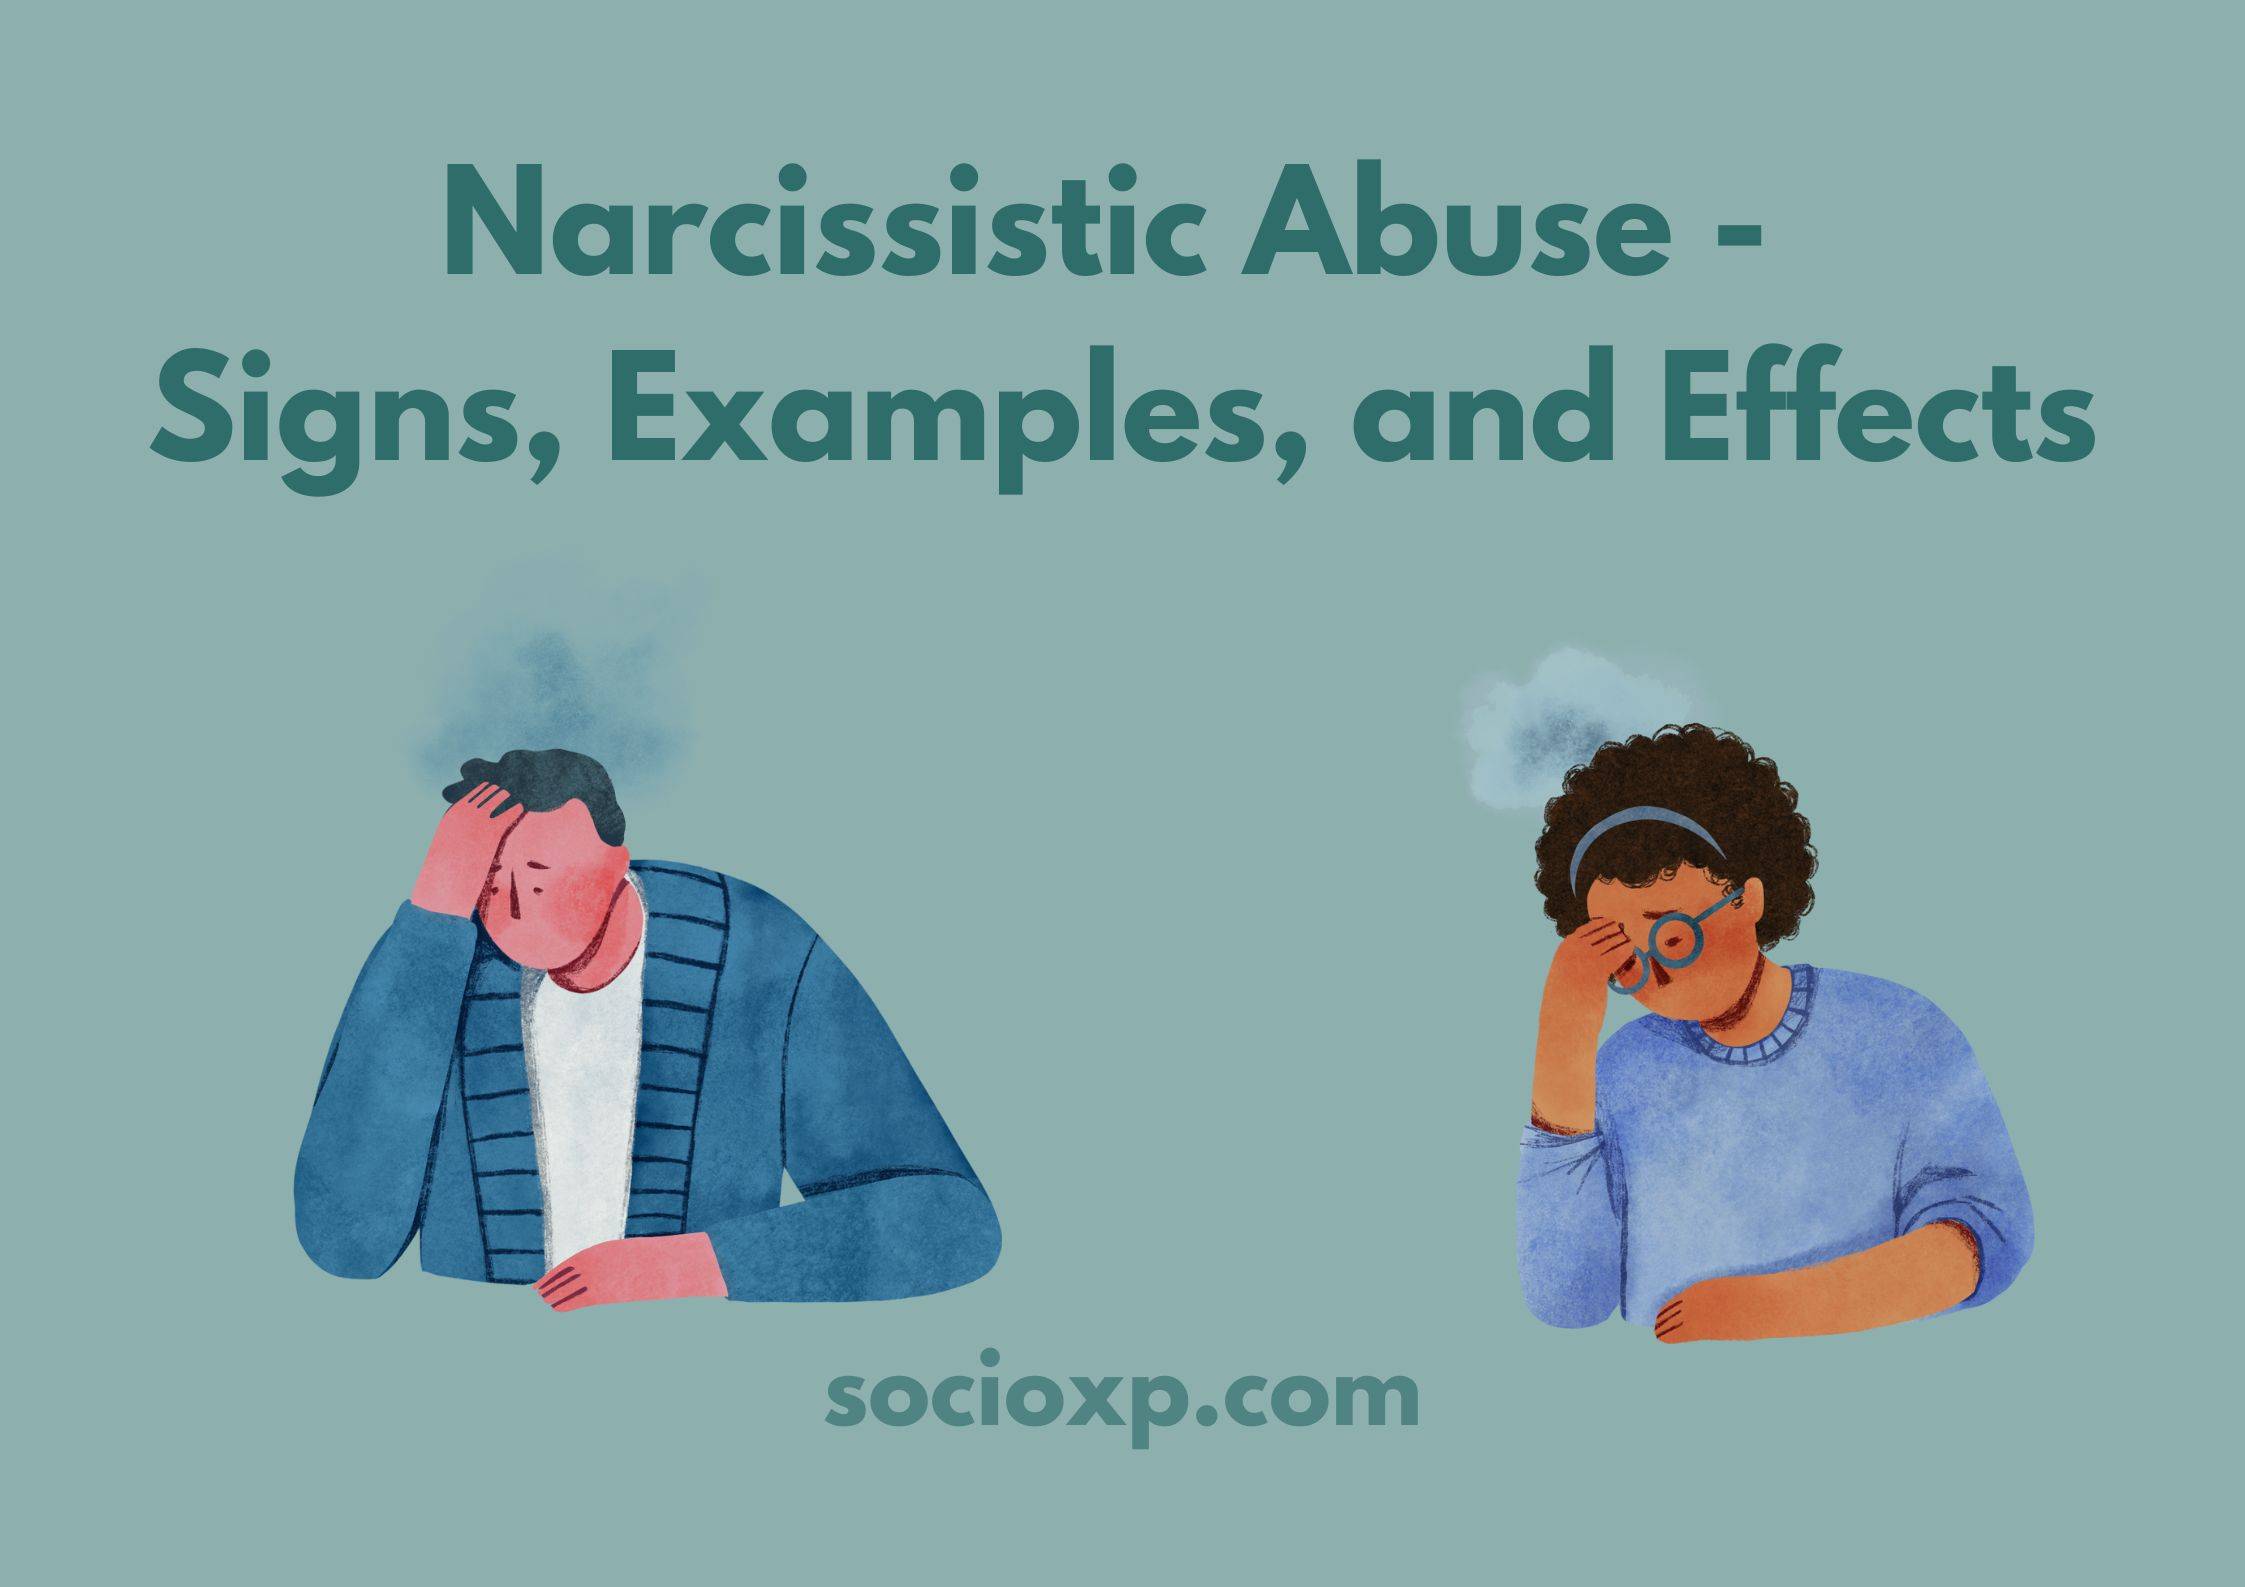 Narcissistic Abuse - Signs, Examples, and Effects